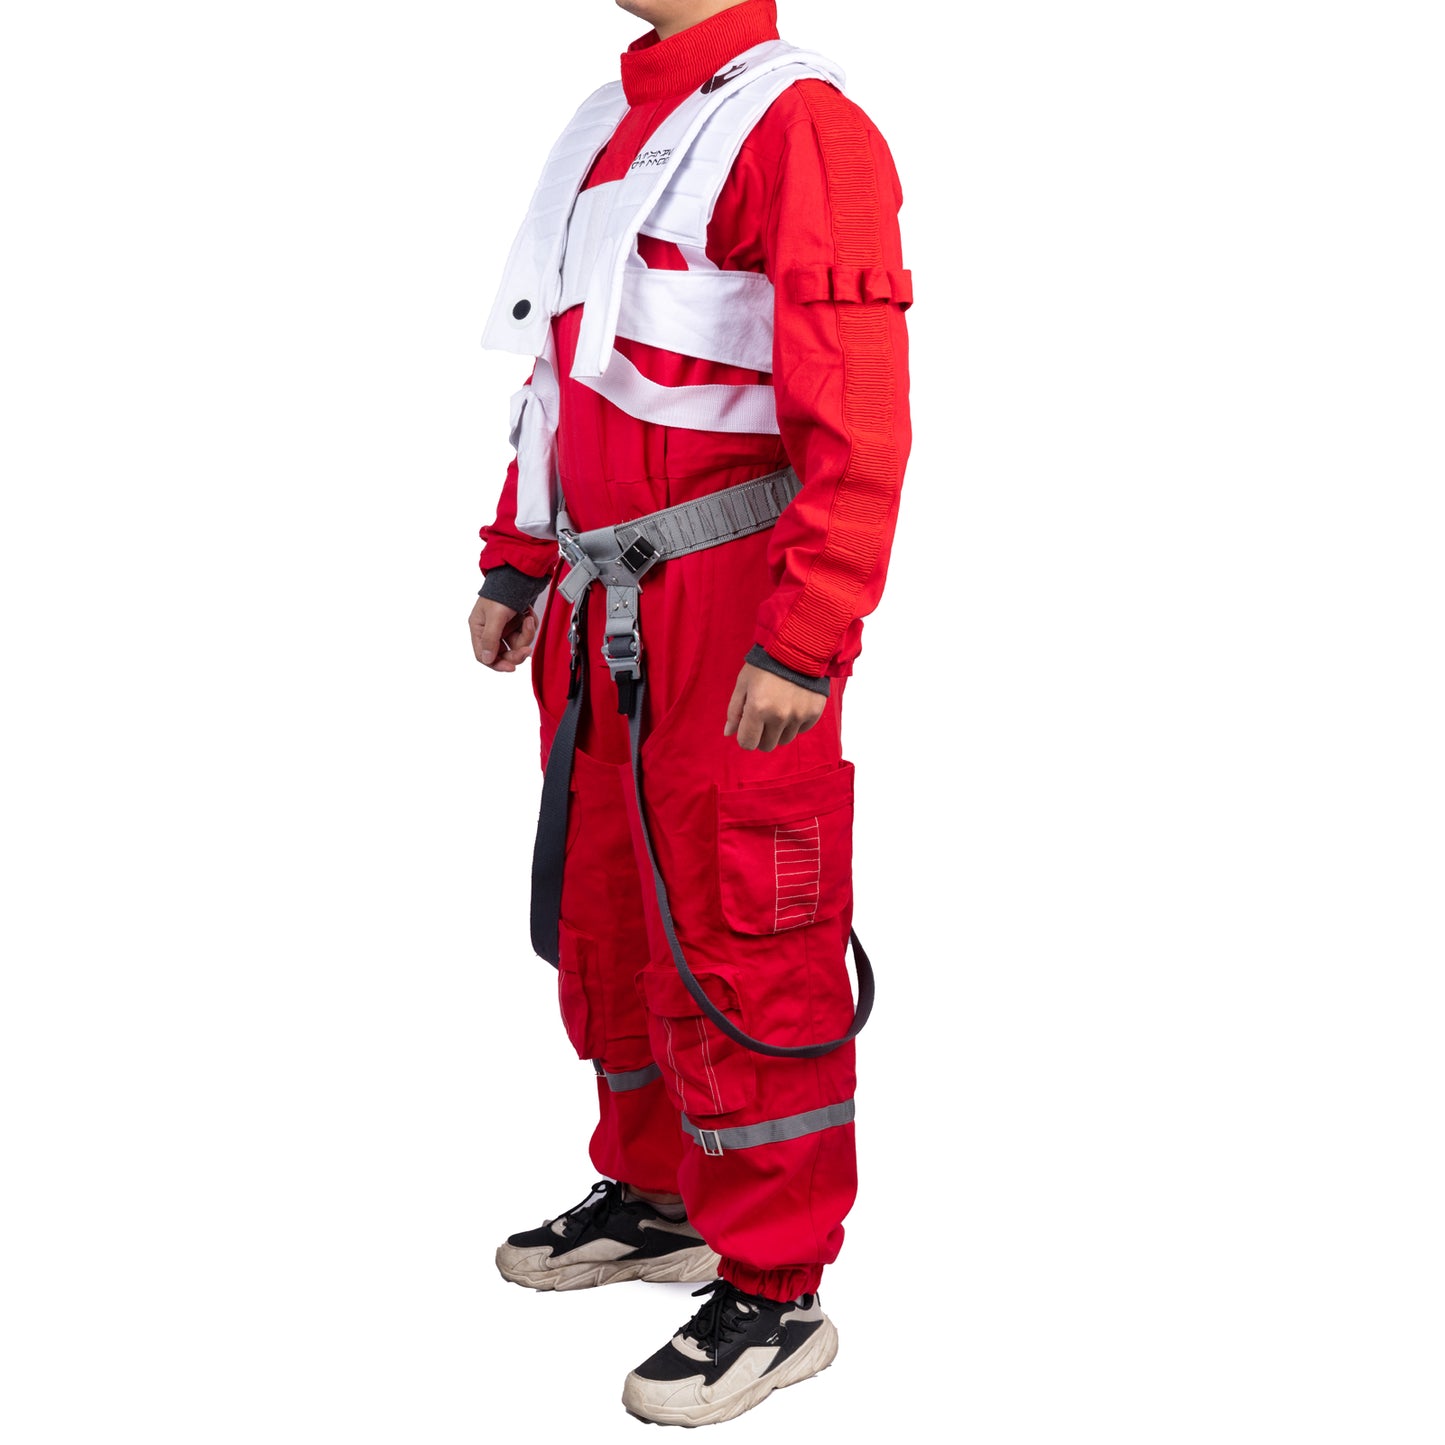 Xcoser Star Wars Poe Dameron Upgrade Costume Cosplay Red Jumpsuit Suit Unisex Halloween Cosplay Outfit